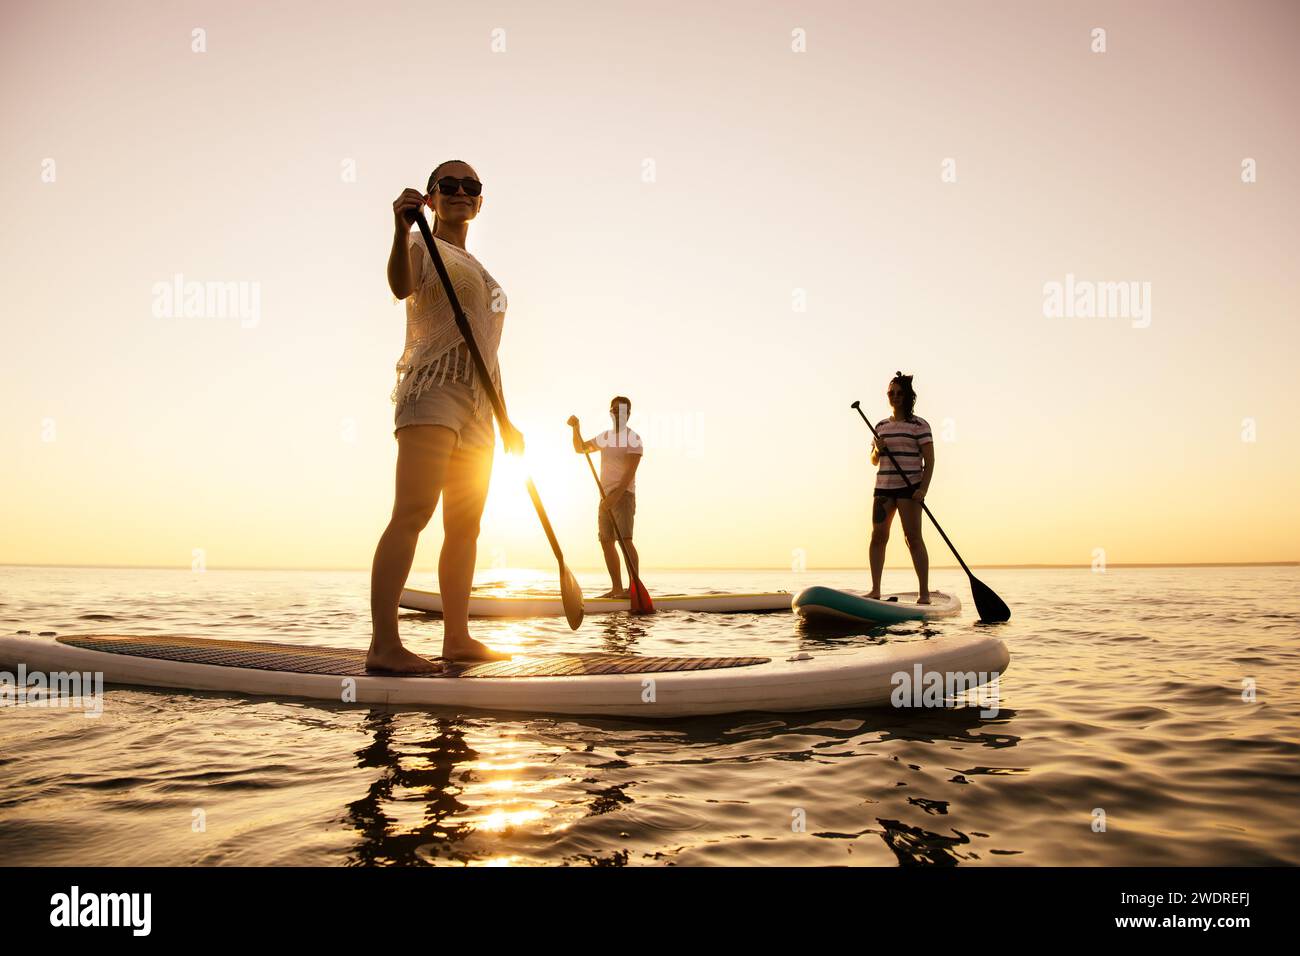 Three active young tourists are walking on standup paddle sup boards at sunset lake Stock Photo